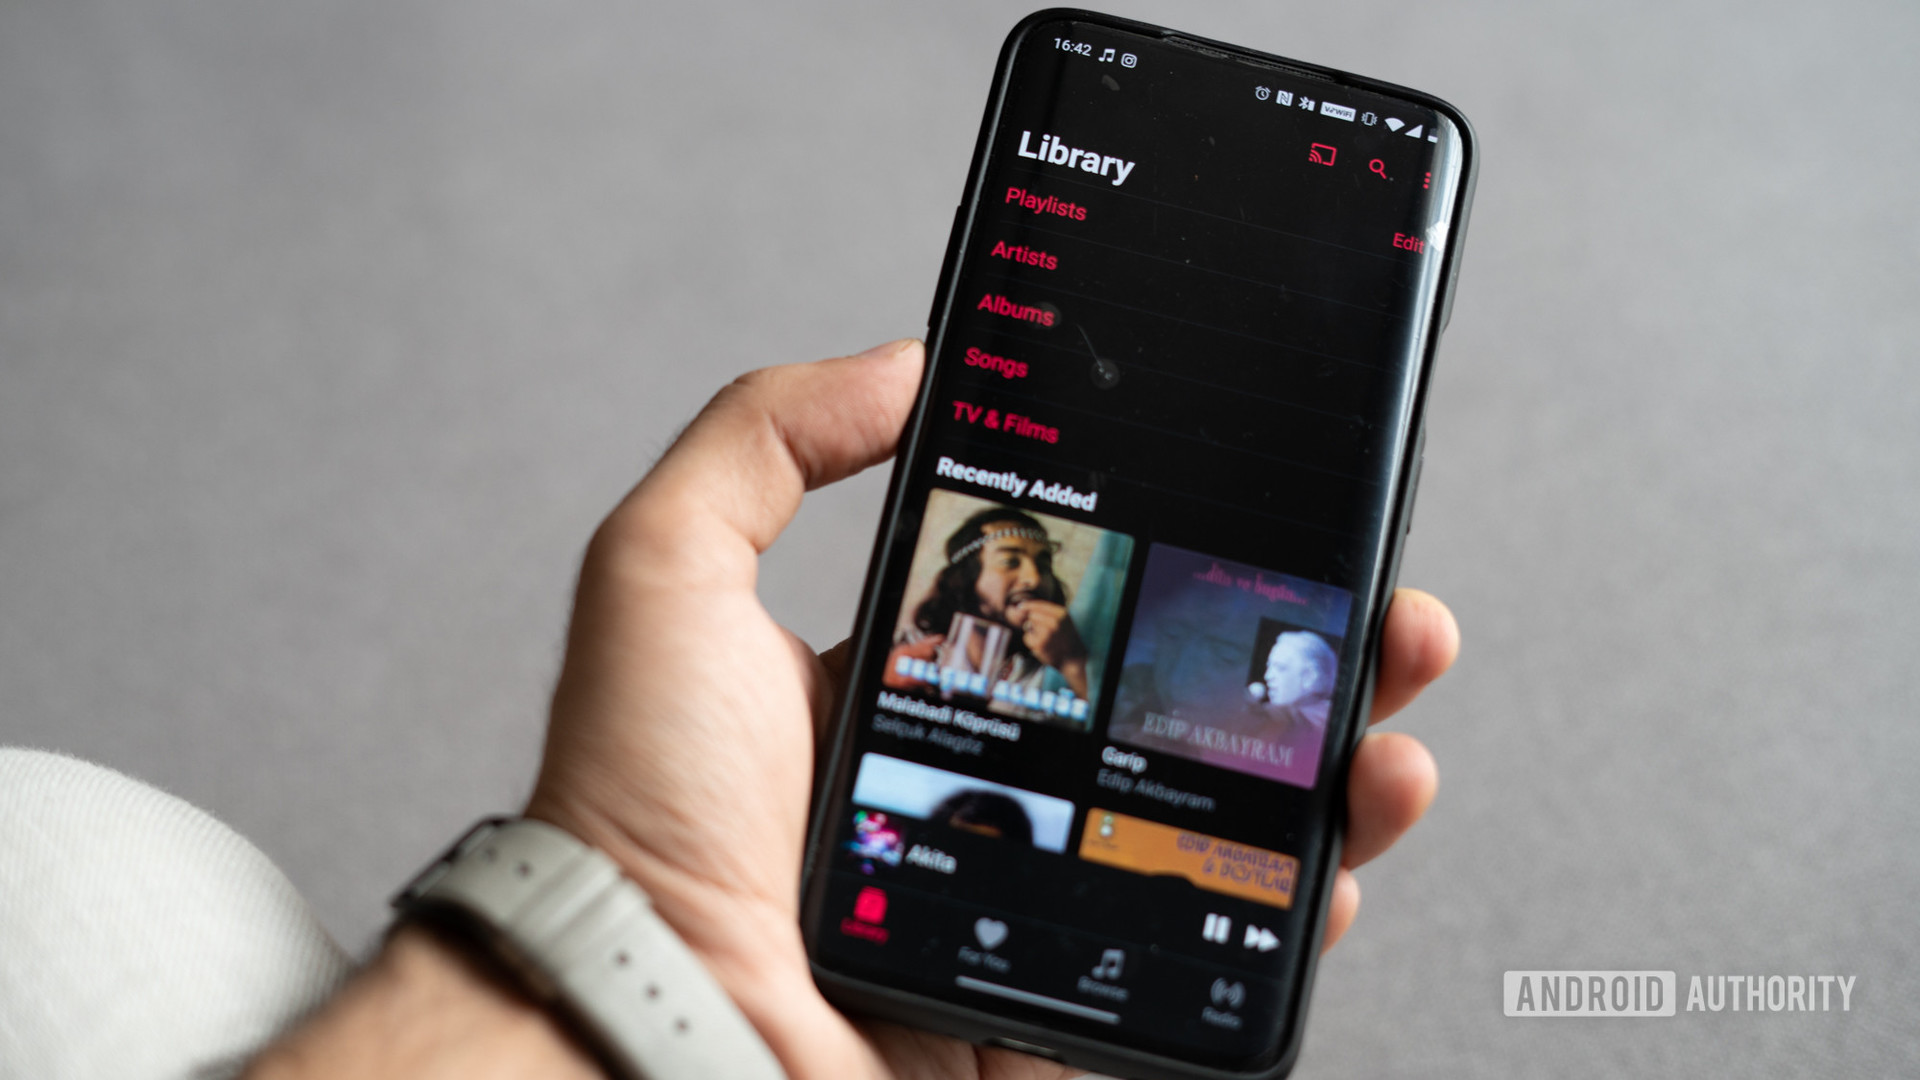 The Apple Music library on an Android phone